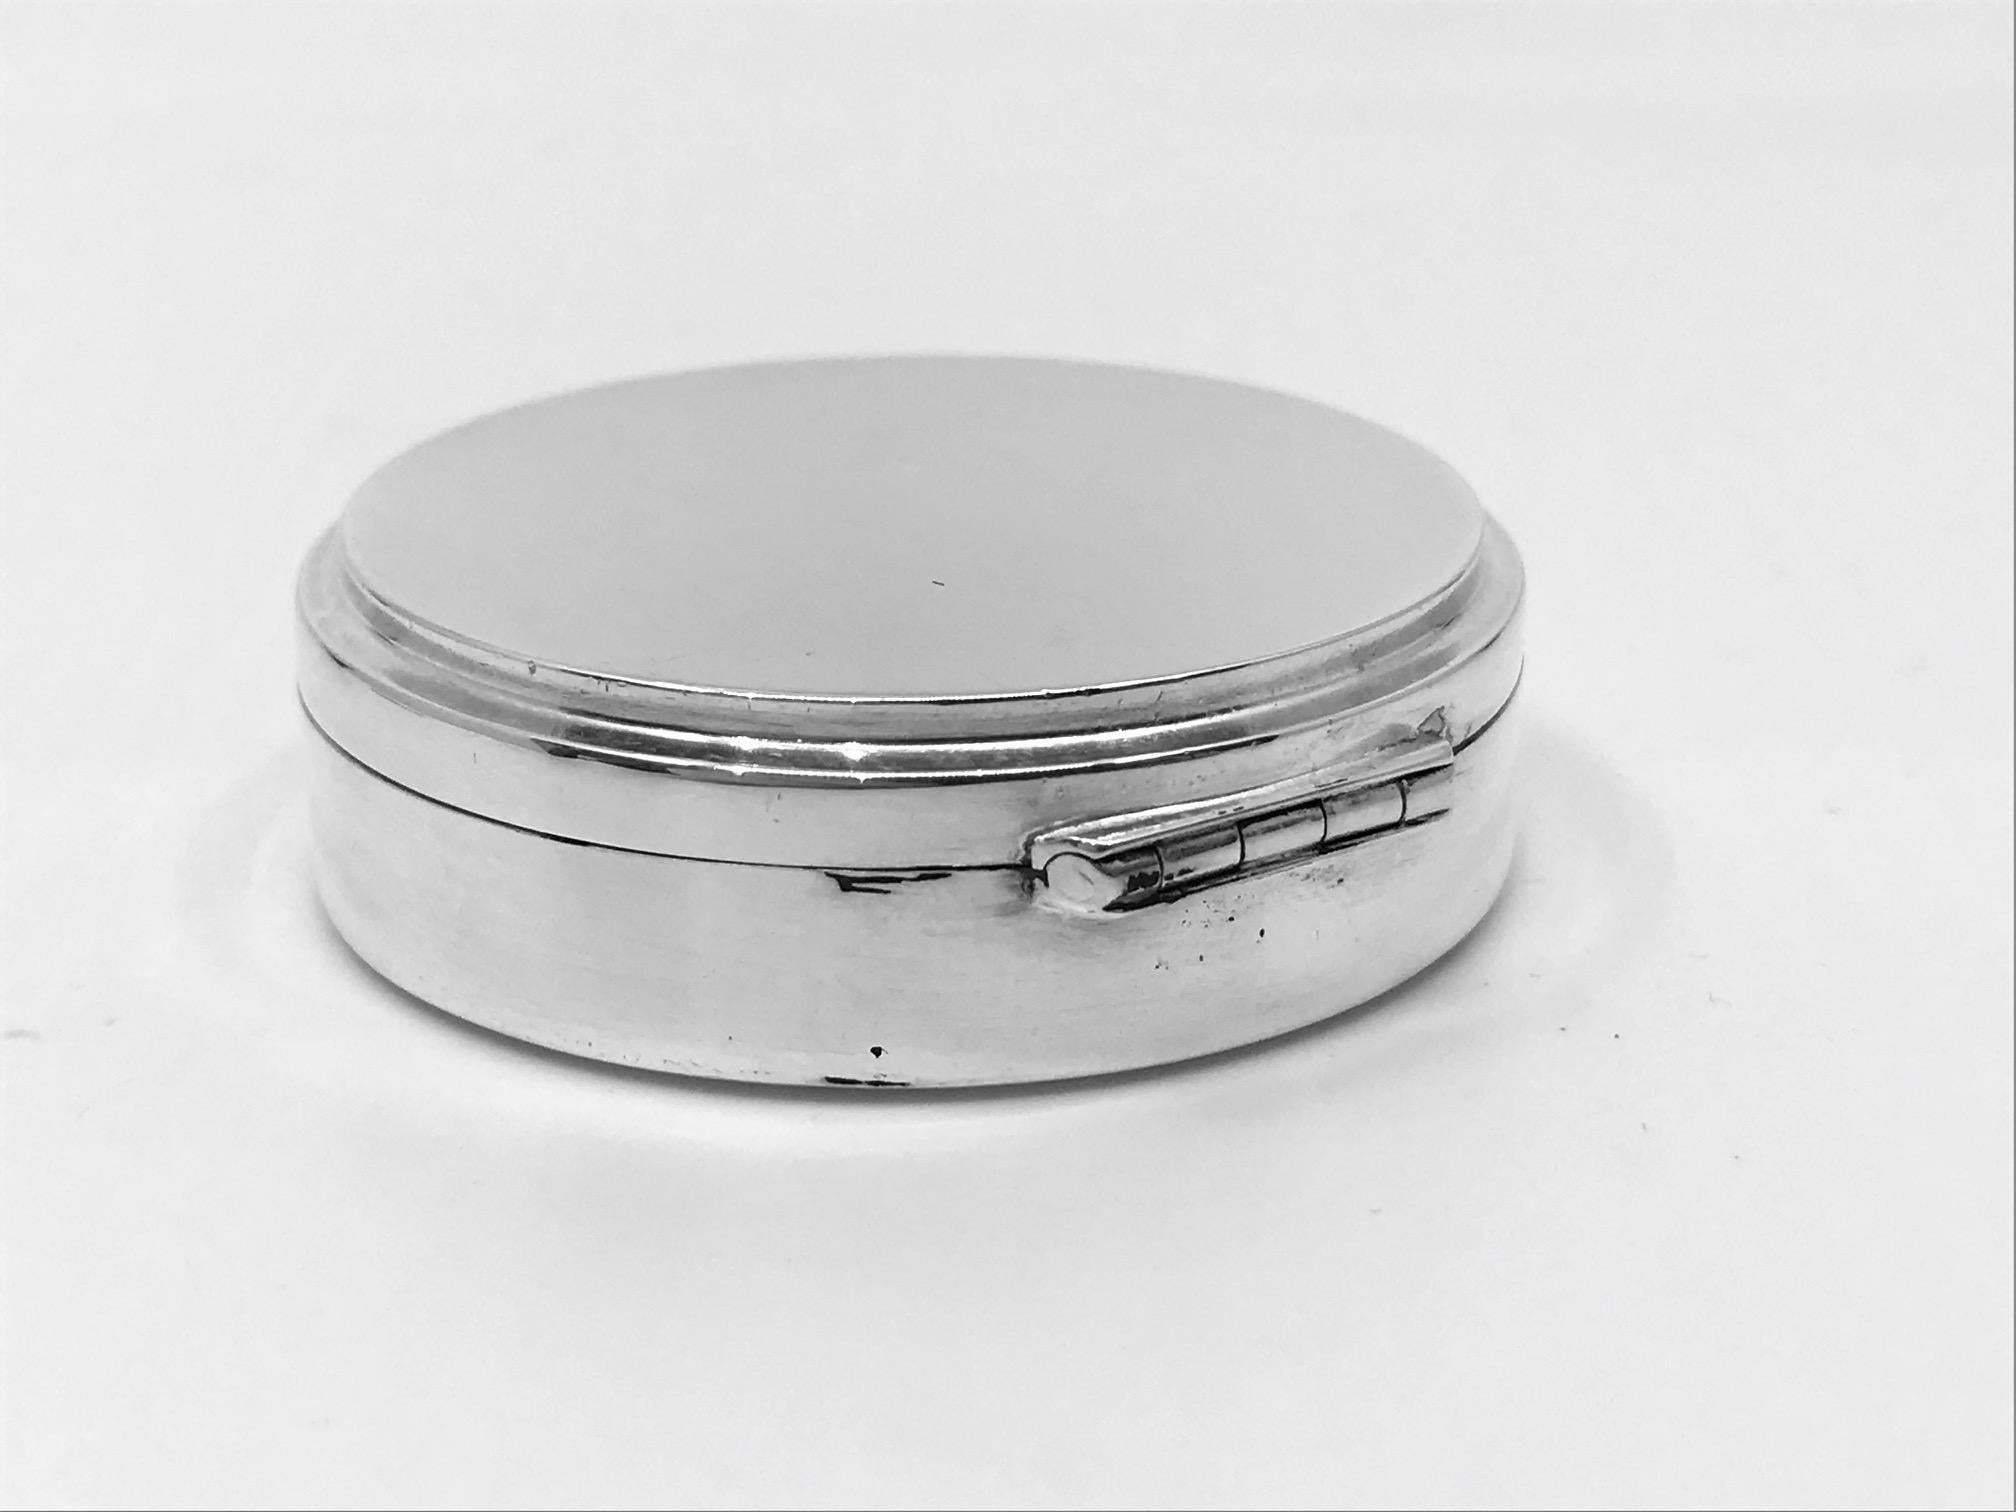 This is a pair of small sterling silver boxes with Georg Jensen signature, both pieces designed by Harald NIelsen. As well as the signature, both pieces are engraved with the date 13.5.35 ( 13th May 1935). The round box is marked with design #134B,